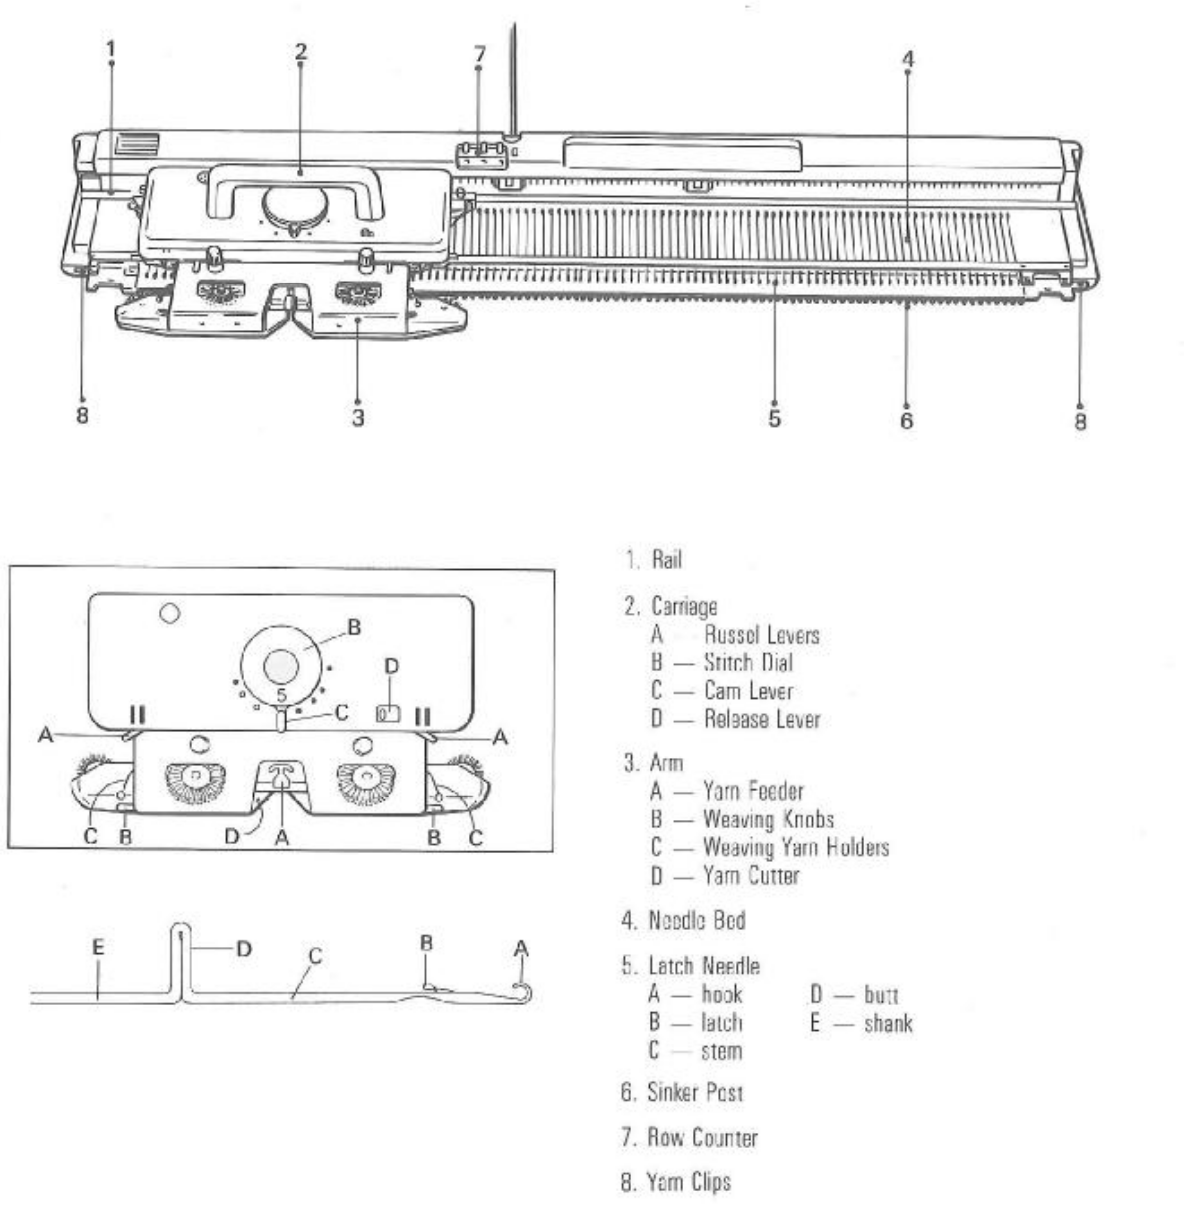 A diagram that points out the different parts of the Silver Reed machine. Parts include the rail, the carriage (slides along the rail, and contains russel levers, a stitch dial, cam and release leavers), the arm (attached to the carriage, contains a yarn feeder, weaving knobs and weaving yarn holders, and a yarn cutter), and a diagram of a latch needle